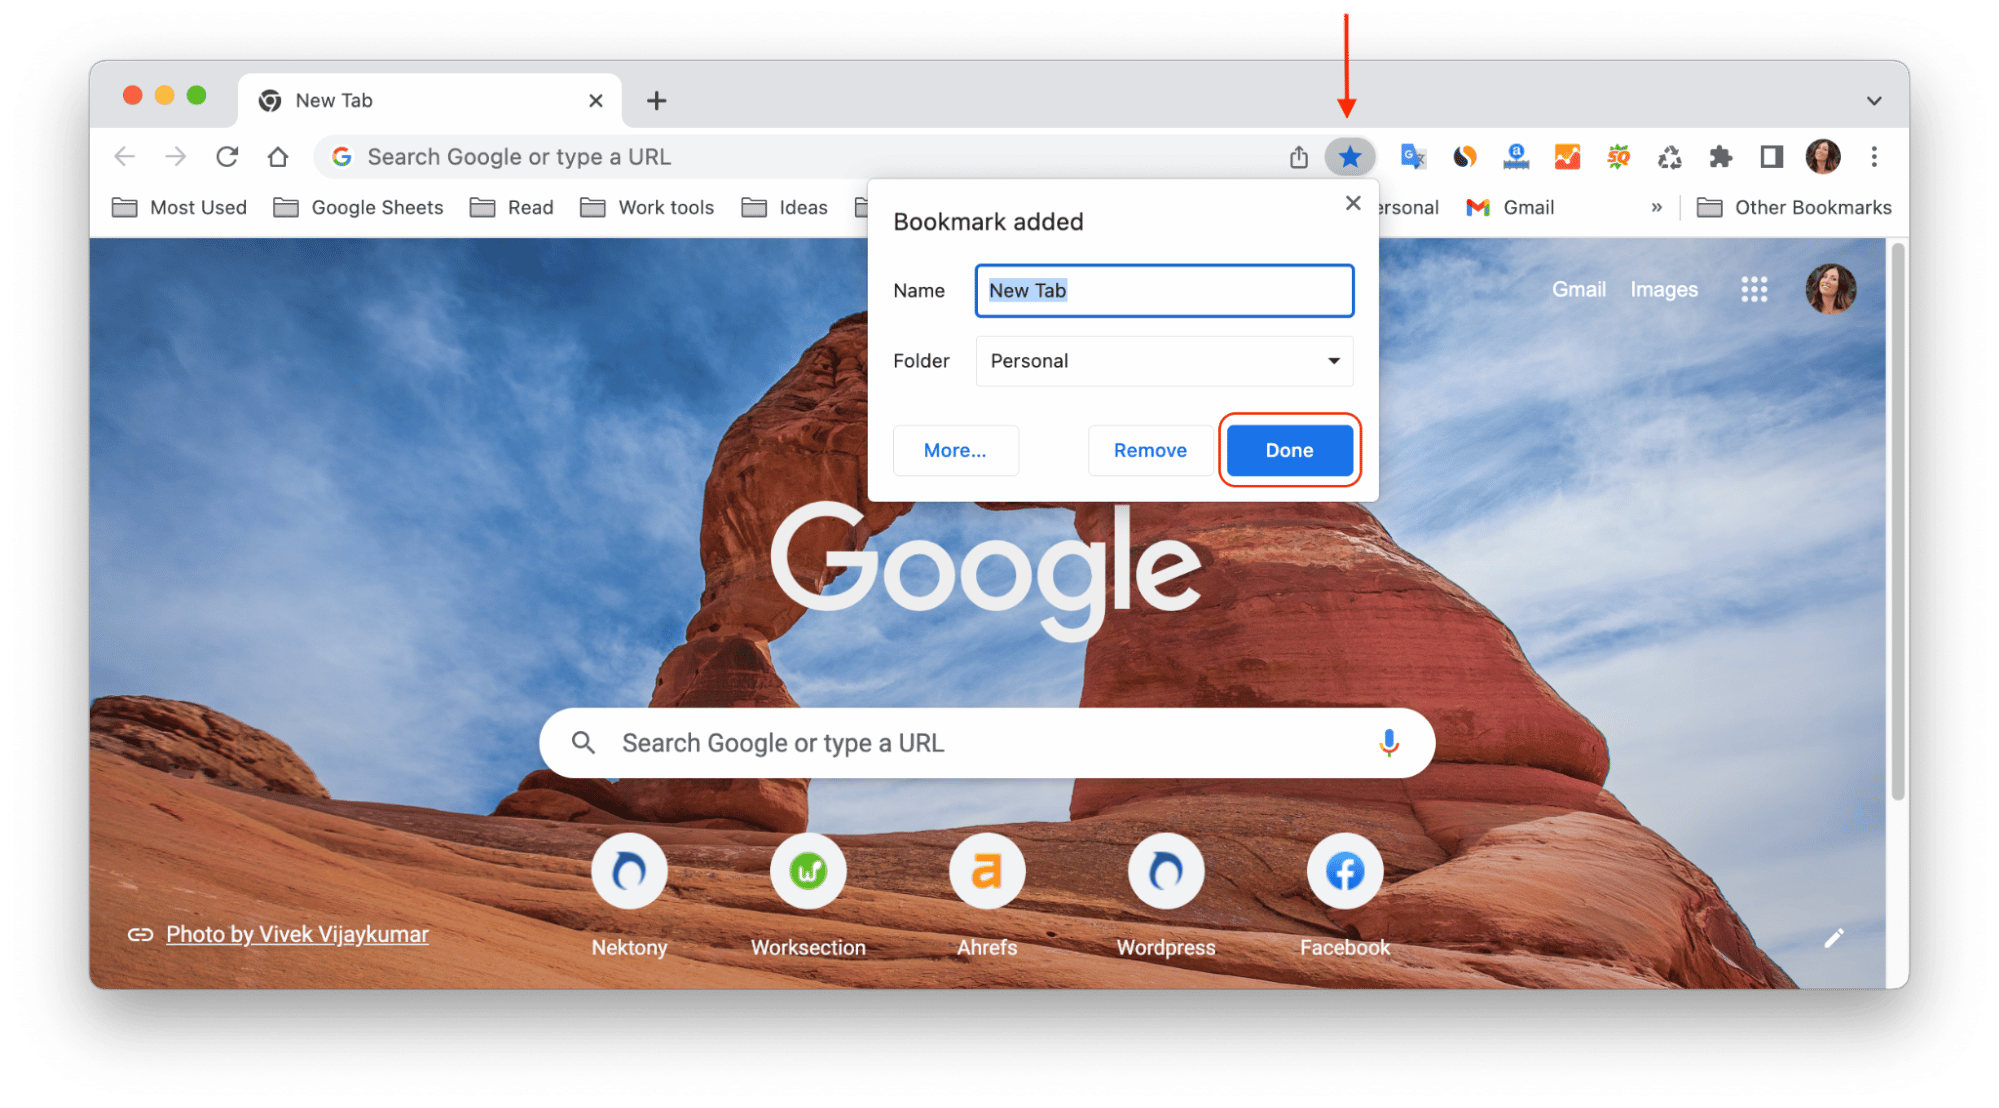 Chrome window showing the star icon to bookmark pages